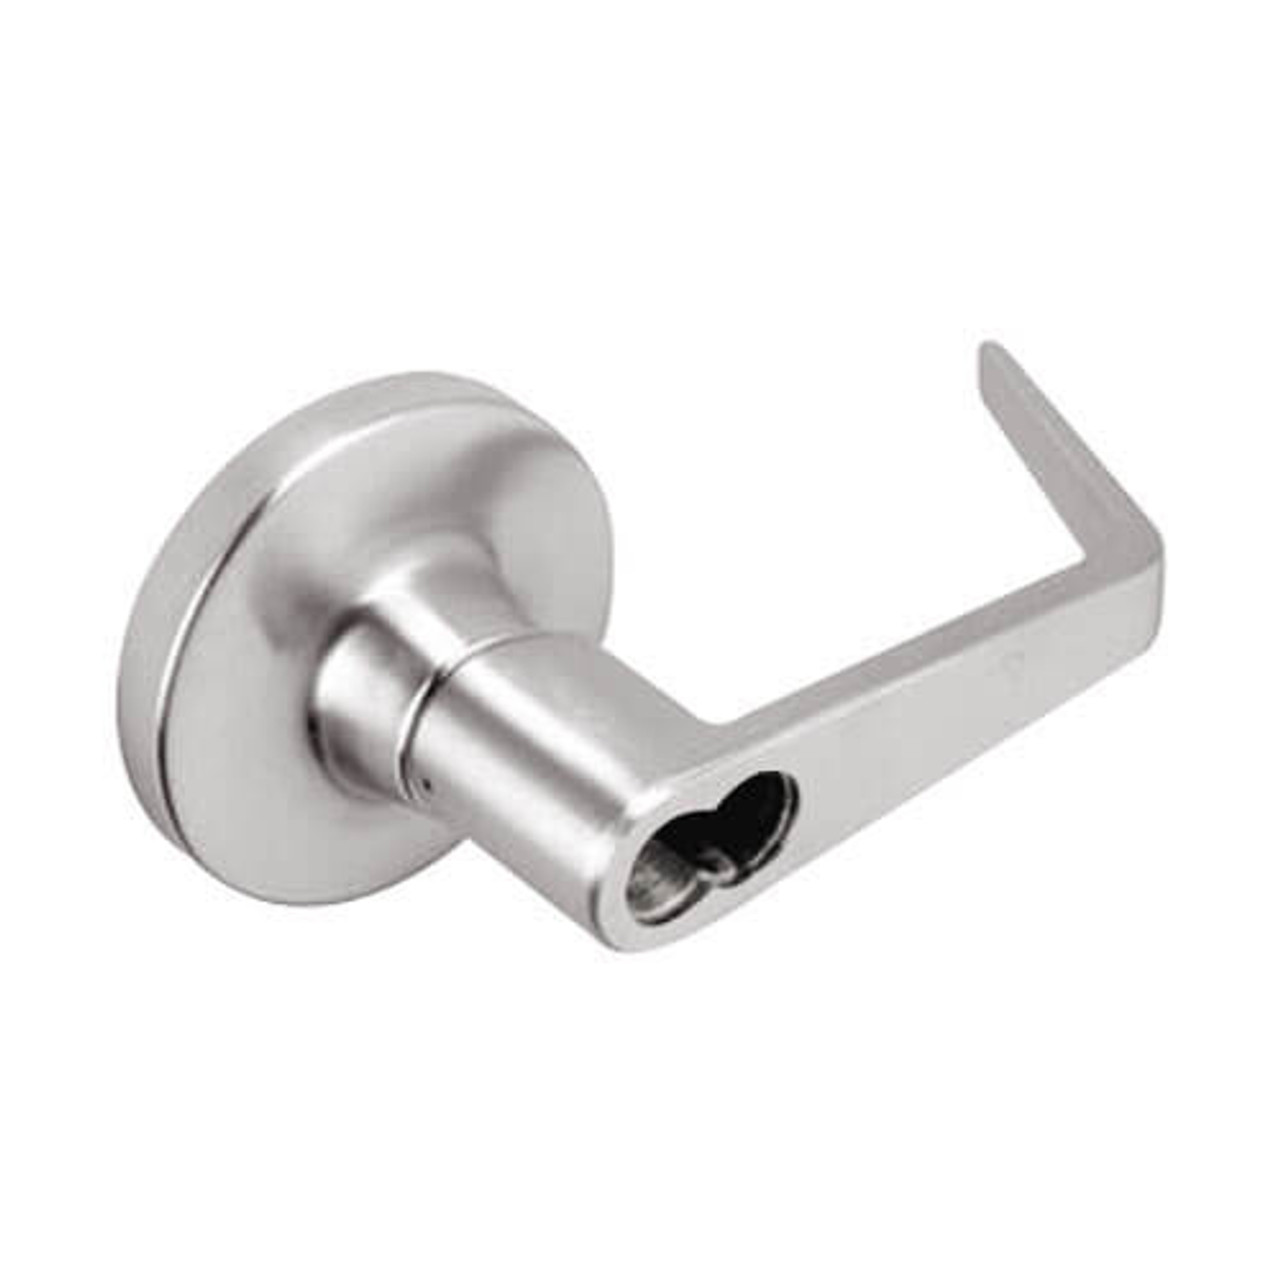 MA531BD-DG-630 Falcon Mortise Locks MA Series Apartment Corridor with DG Lever in Satin Stainless Finish